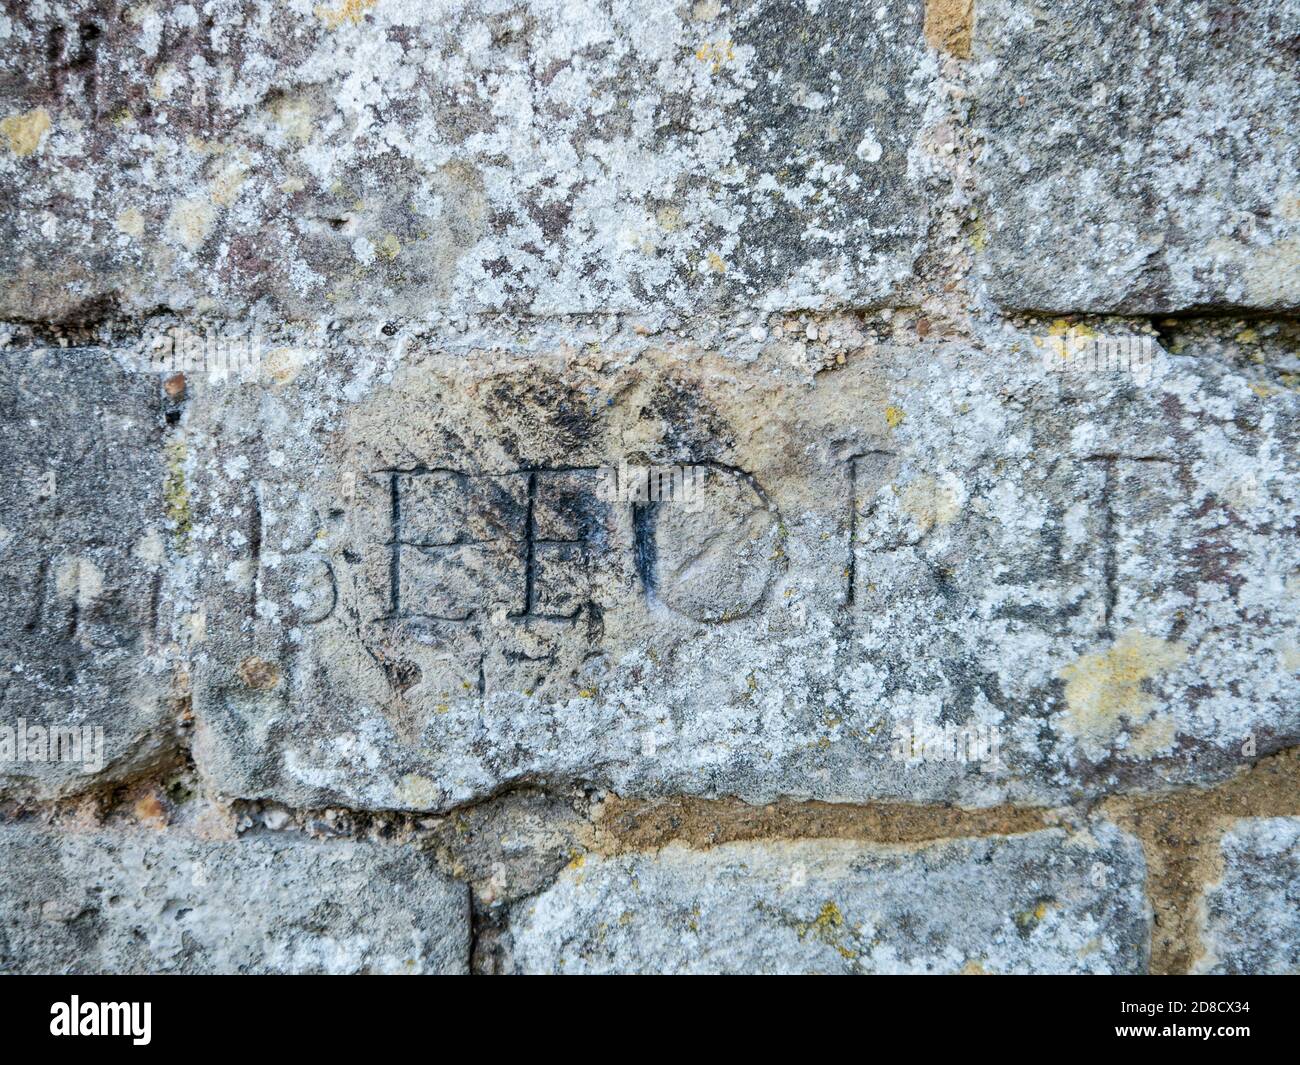 Graffiti made by Napoleonic prisoners of war, inscribed on the walls of Portchester castle, England. Stock Photo